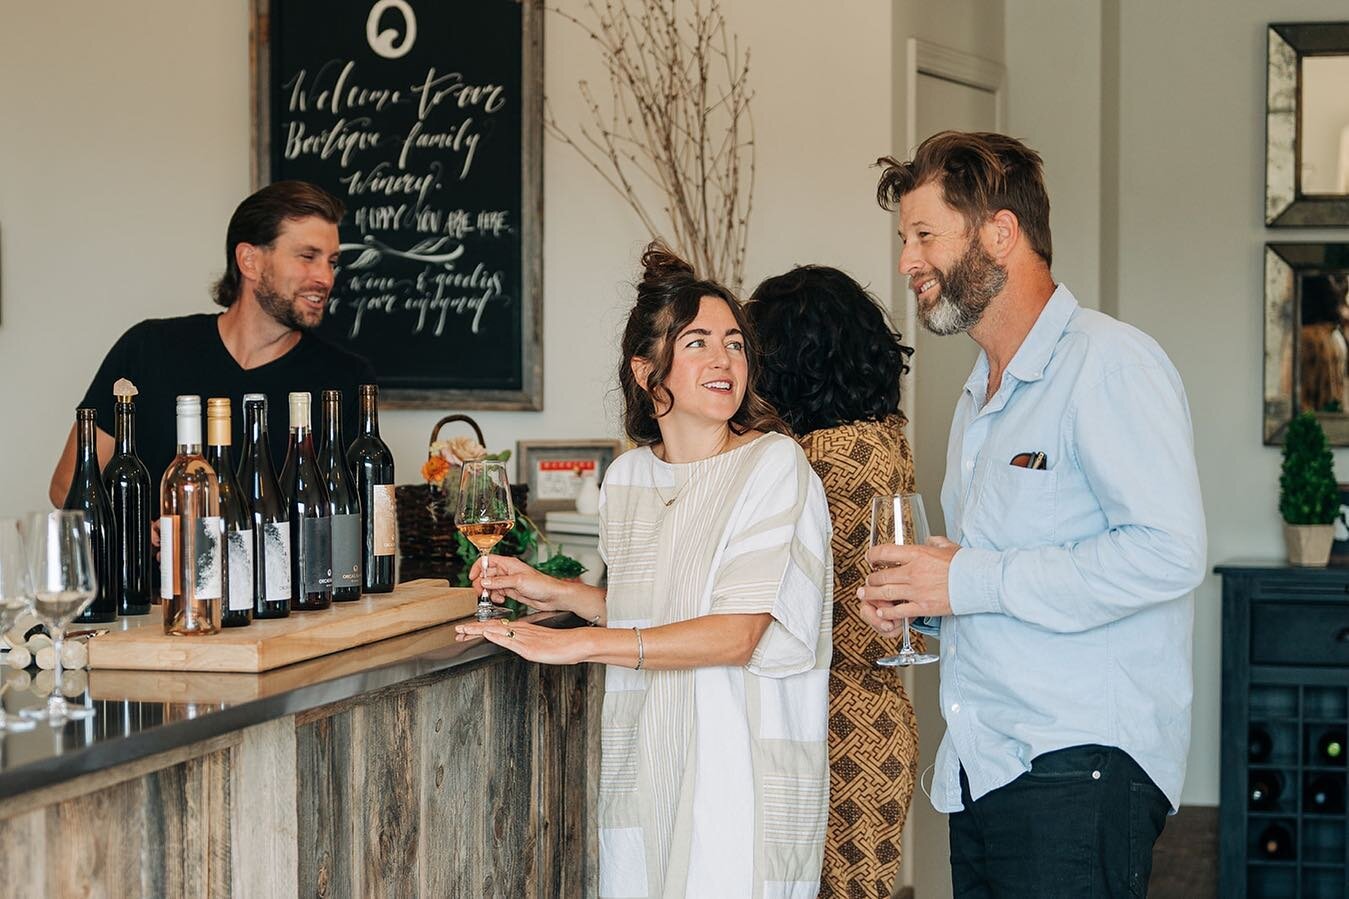 When you book your wedding or special event with us, not only do you have access to the wine garden and entire property, you can enjoy the winery&rsquo;s modern farmhouse which houses our tasting room, lounge and bar. Let the good times roll! ✨🥂

Th